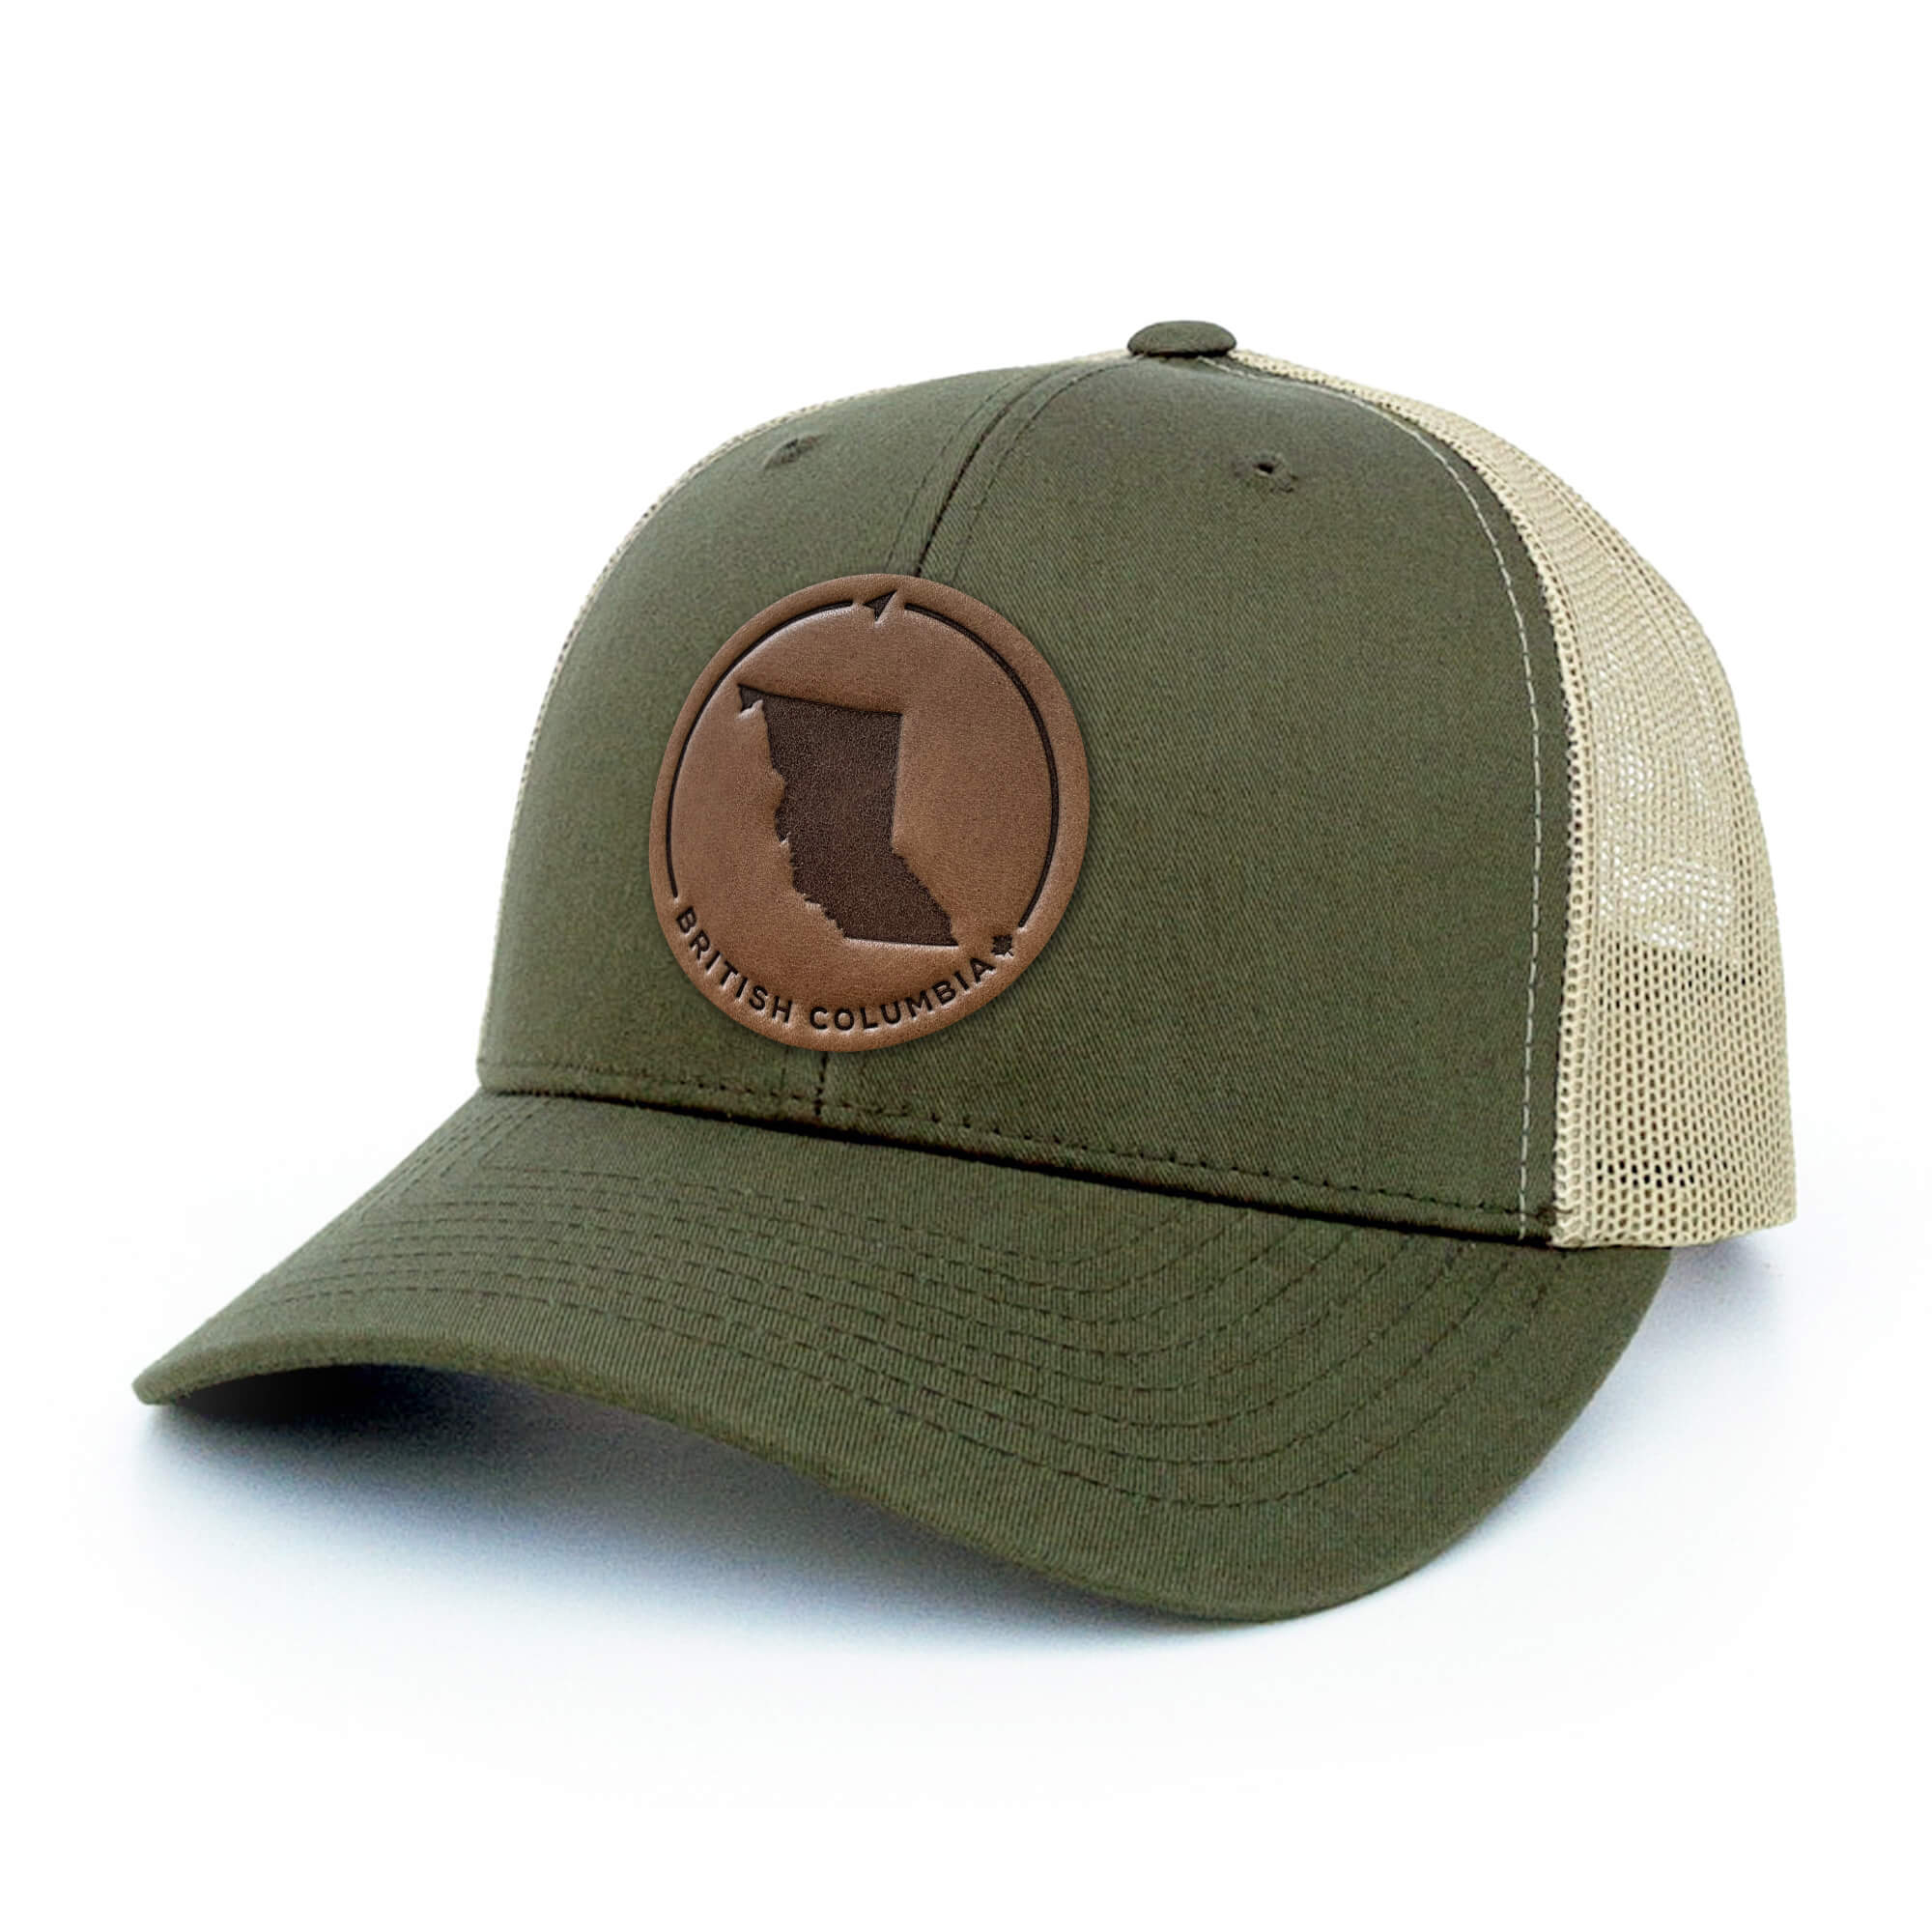 British Columbia Leather Patch Hat, Navy - Trucker Hat, Made in Canada with Full-Grain Leather